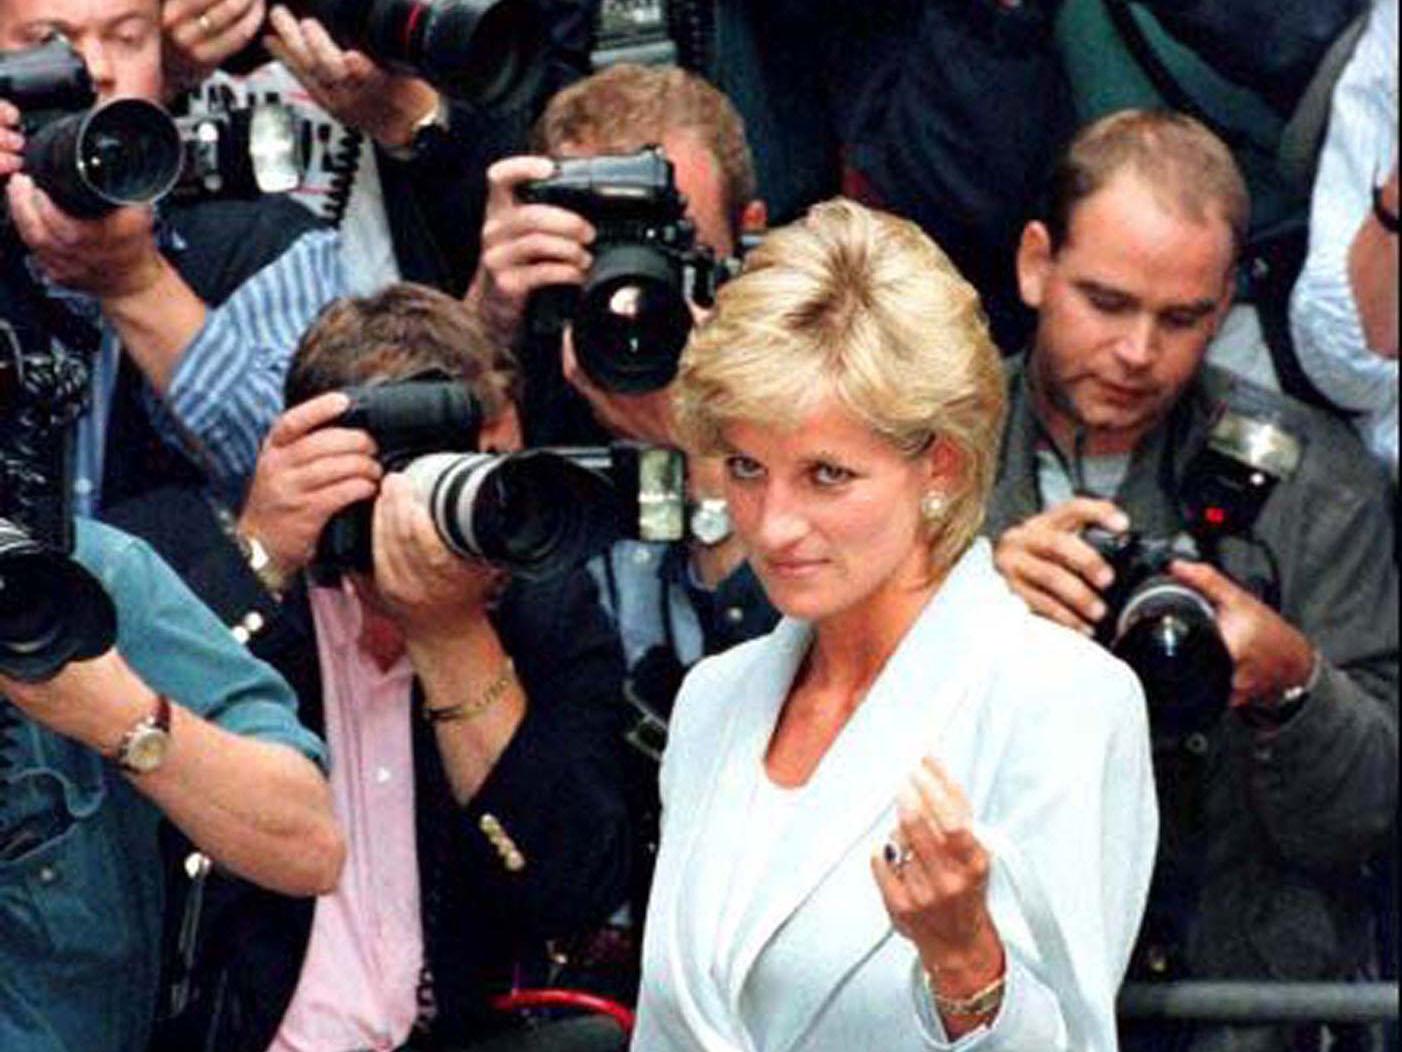 Princess Diana was dogged by the press pack throughout her public life